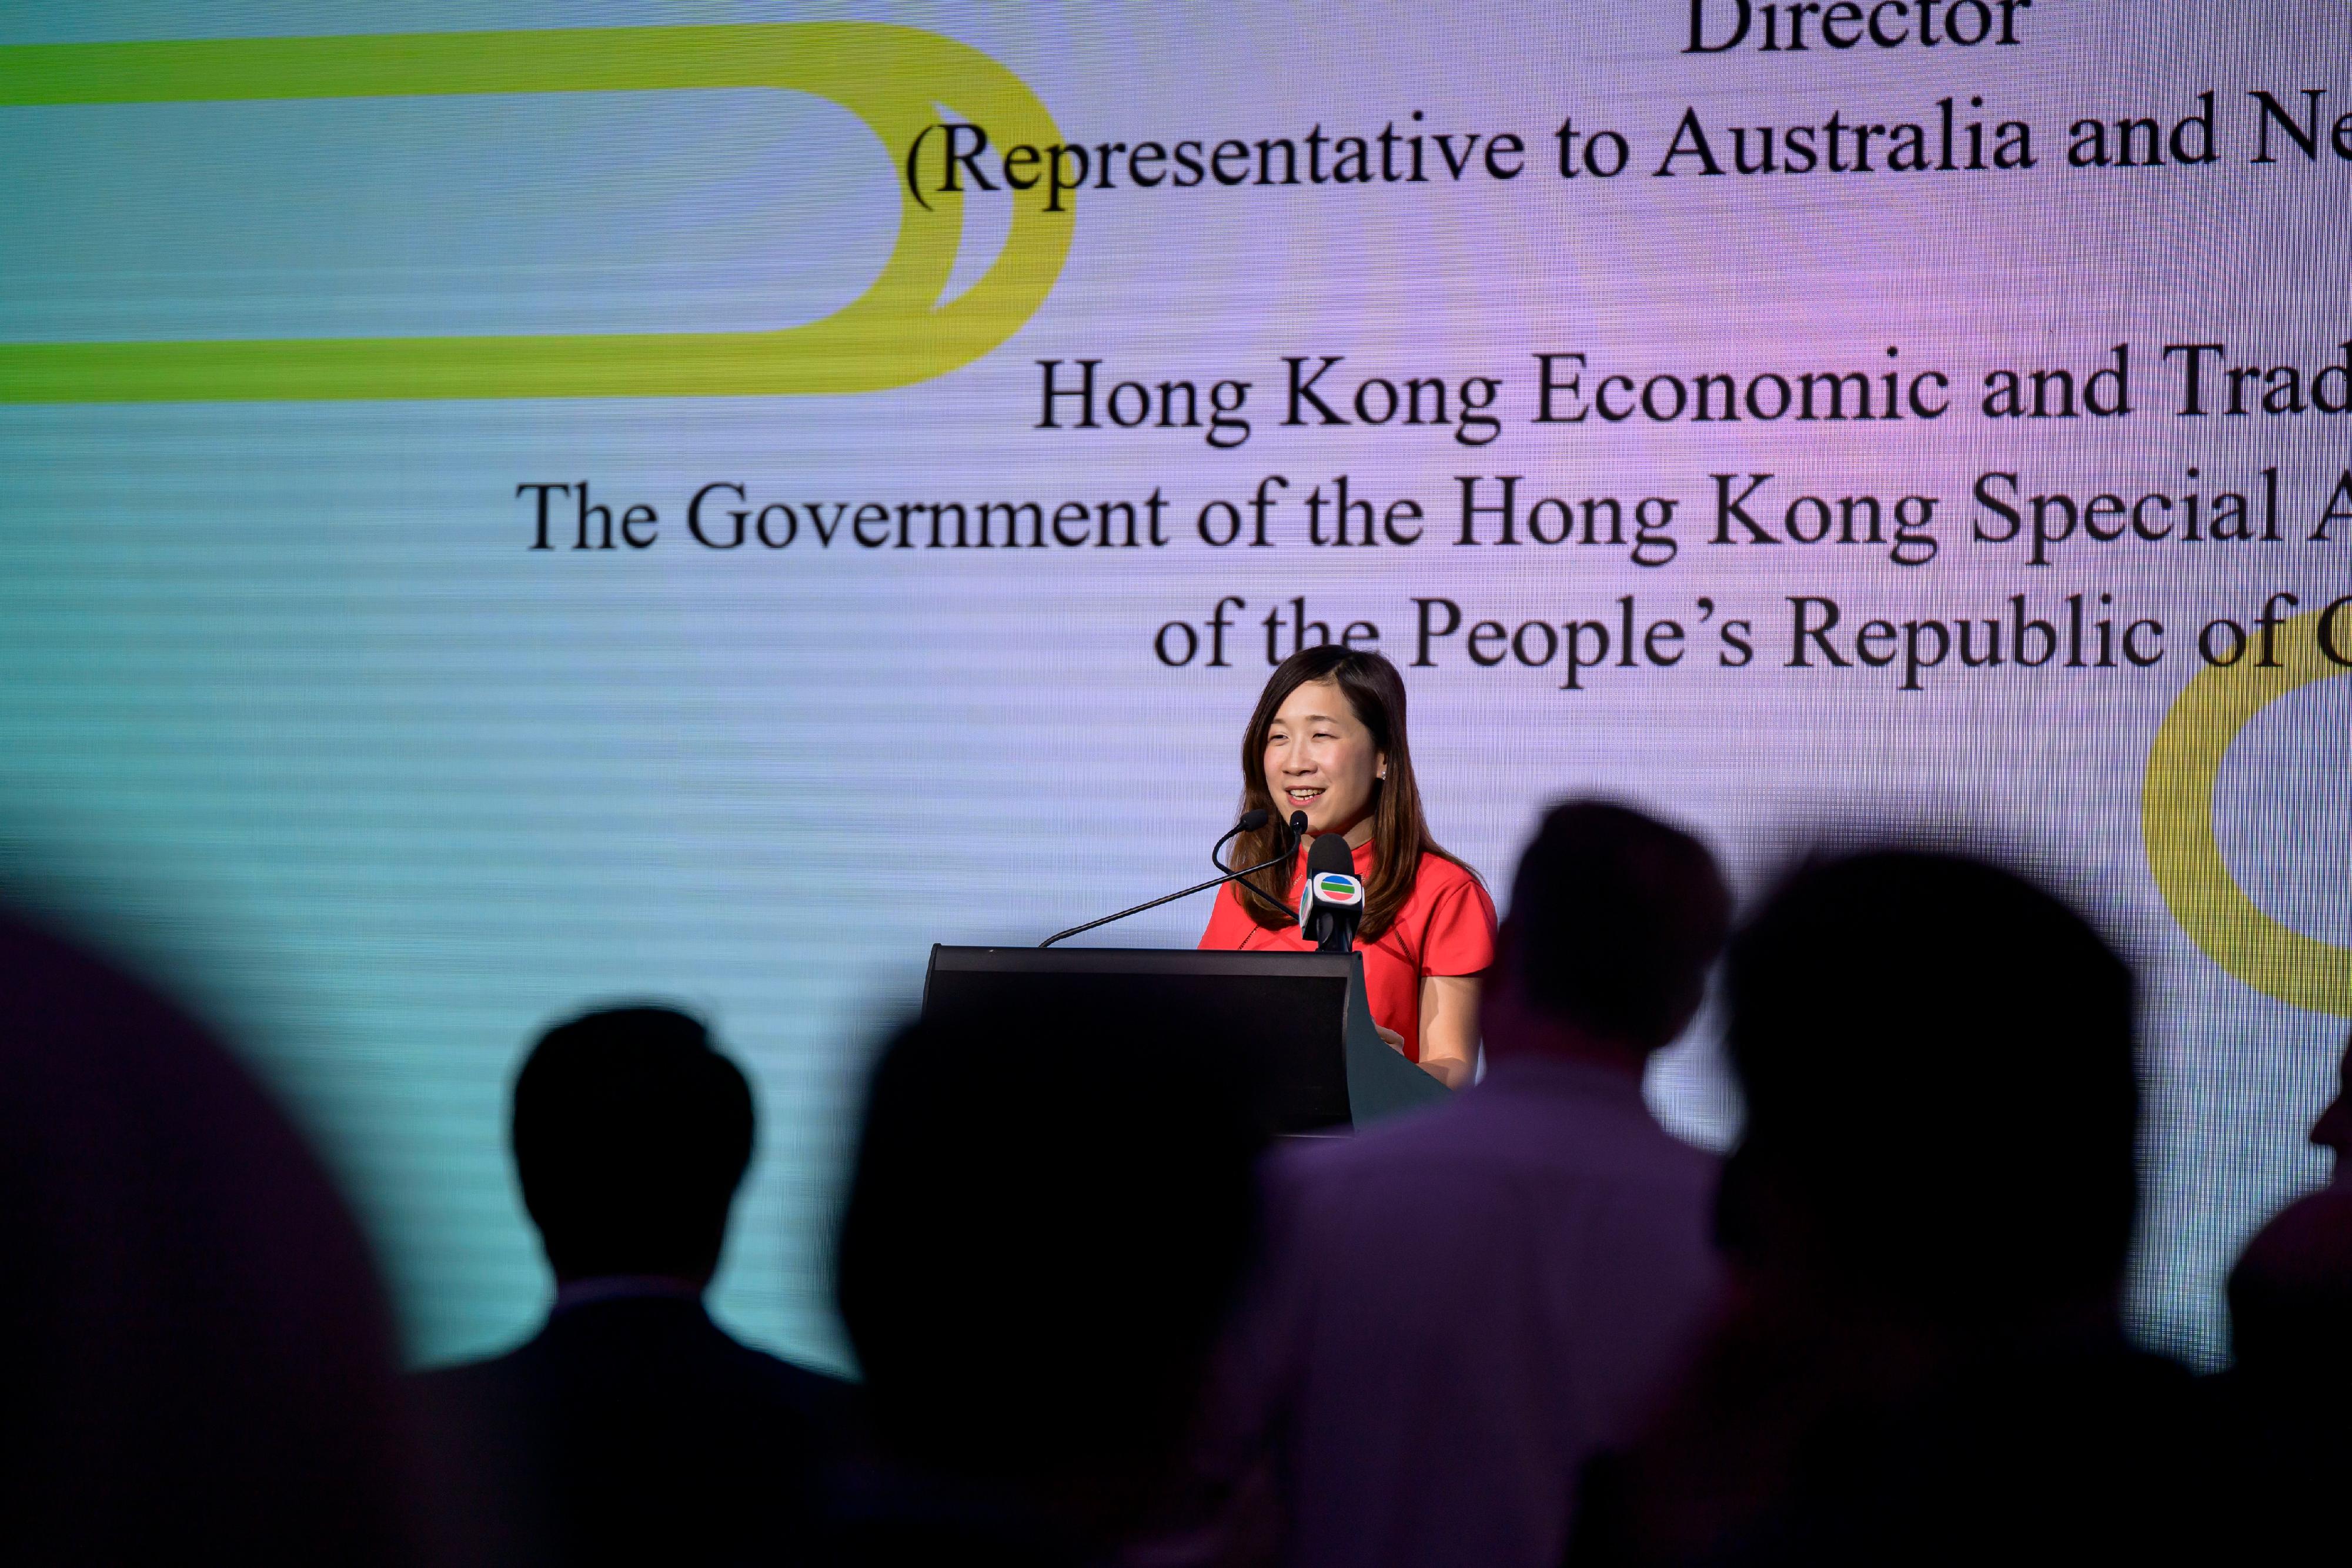 The Director of the Hong Kong Economic and Trade Office, Sydney, Miss Trista Lim, delivers a speech at a reception held in Sydney, Australia, yesterday (February 20) to celebrate the Year of the Dragon.